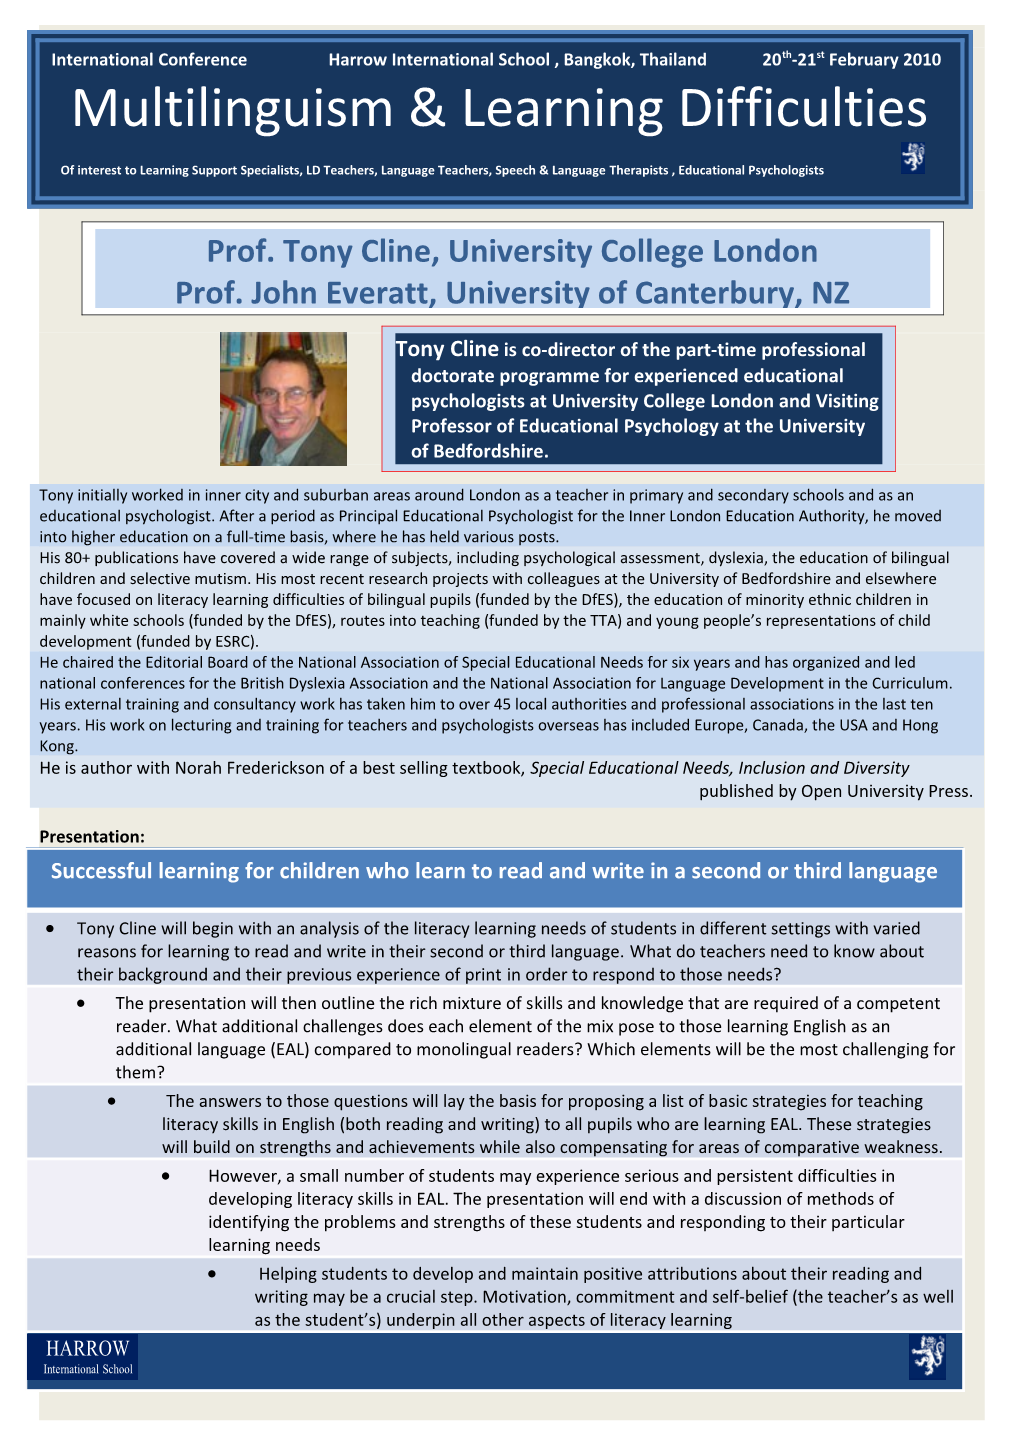 Tony Cline Will Begin with an Analysis of the Literacy Learning Needs of Students in Different